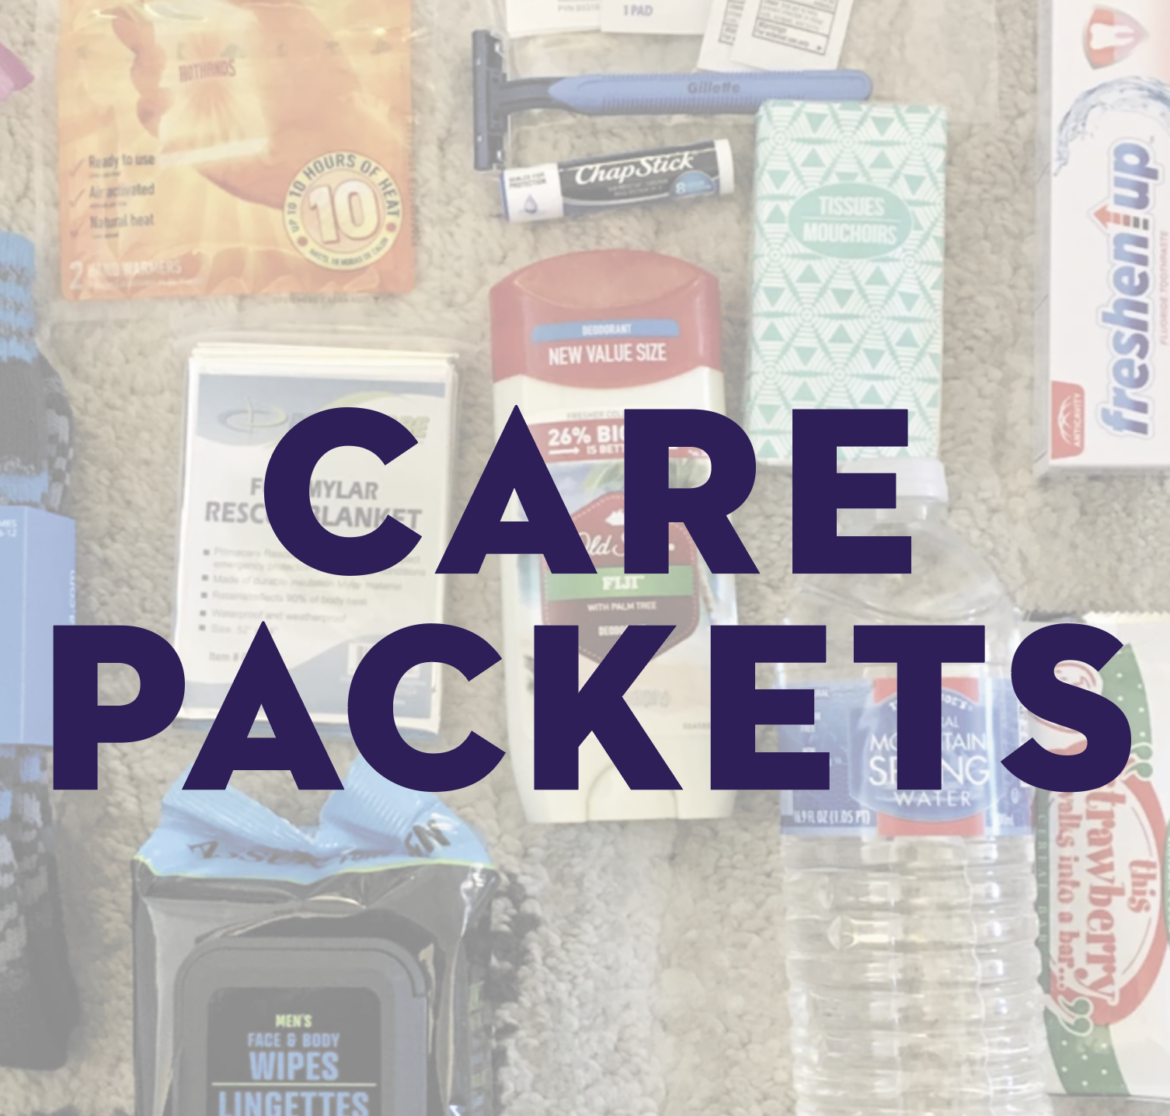 Care Packet Packaging Party for Unhoused Visitors